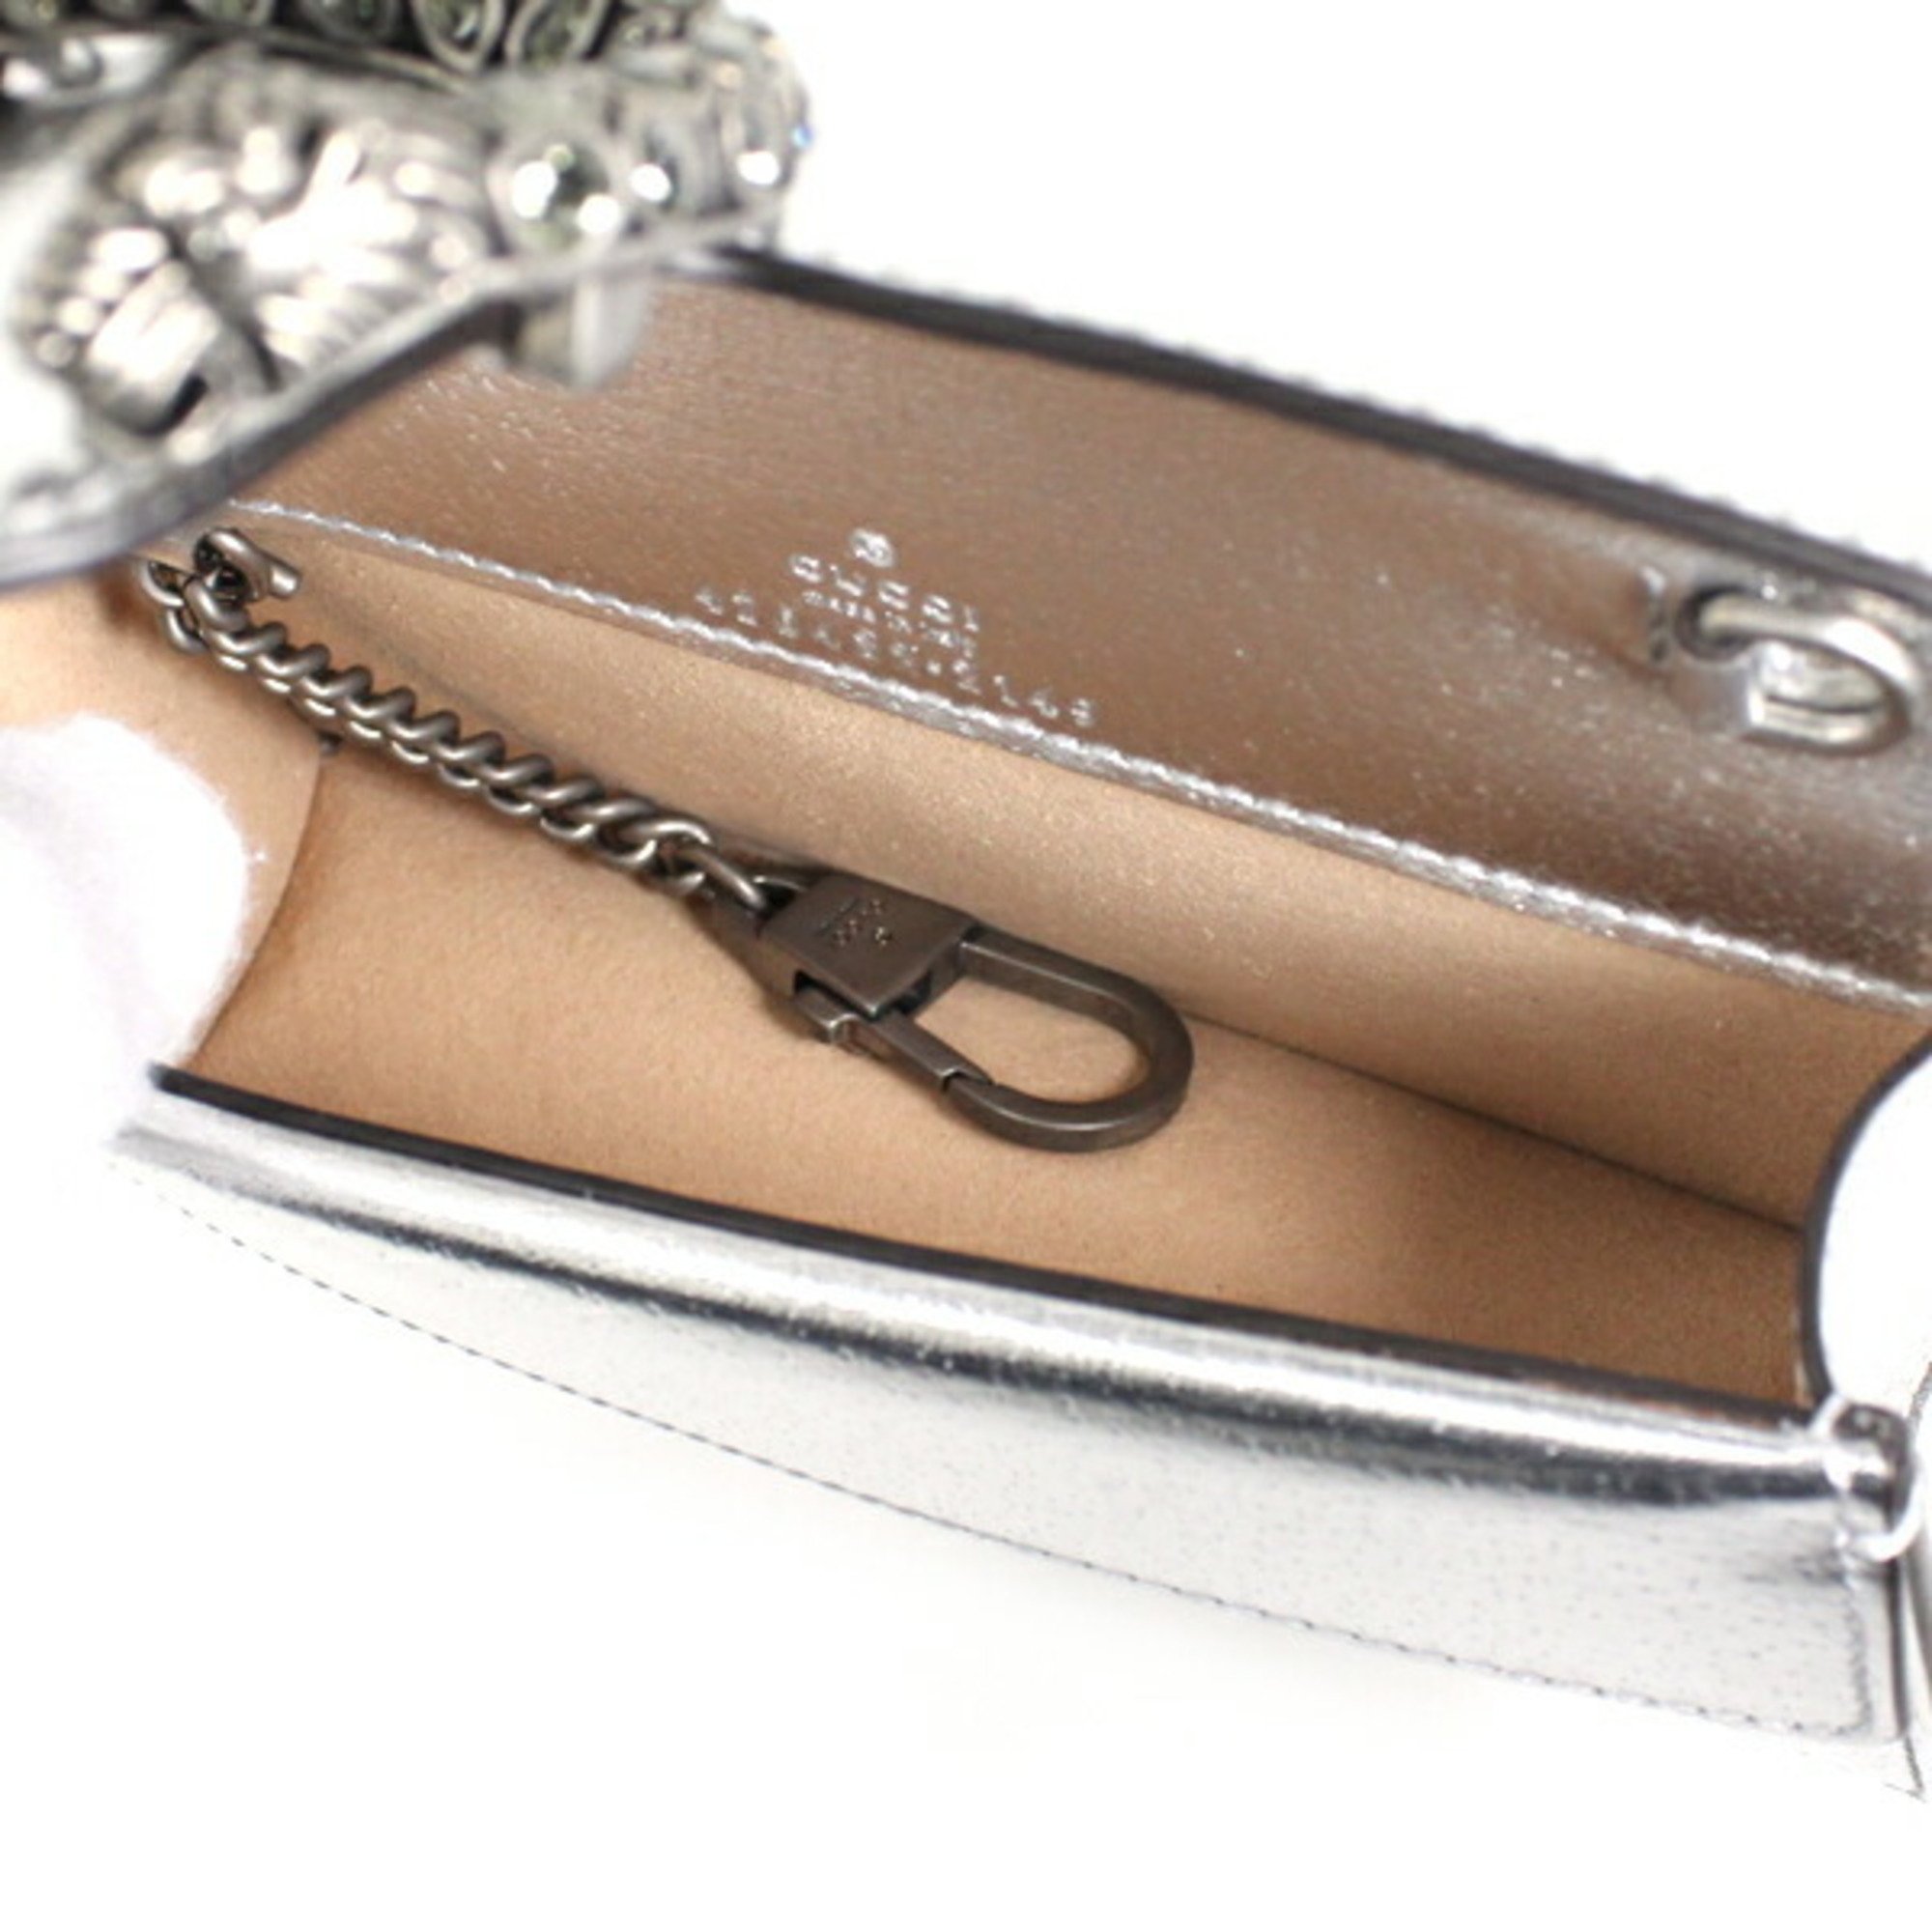 Gucci Chain Shoulder Bag Super Duonissos Silver Leather 476432 GUCCI Ladies Included T3883-r